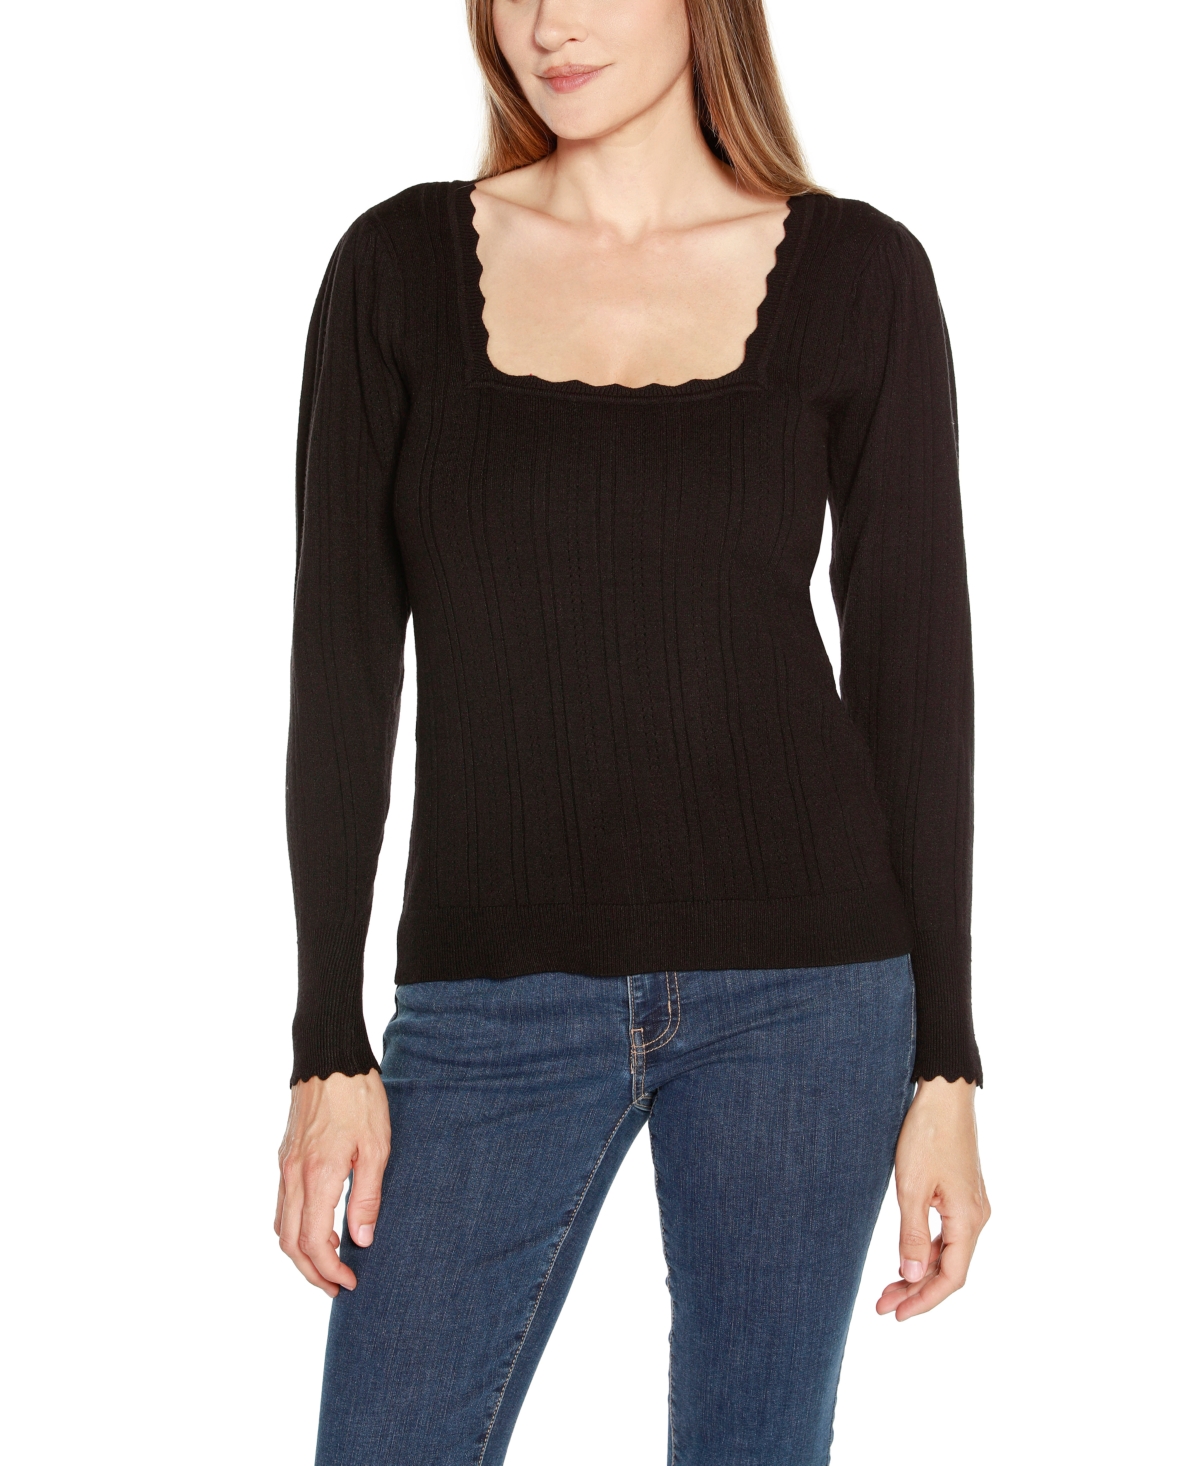 Women's Kaily K. Square Neck Sweater - Deep Emerald